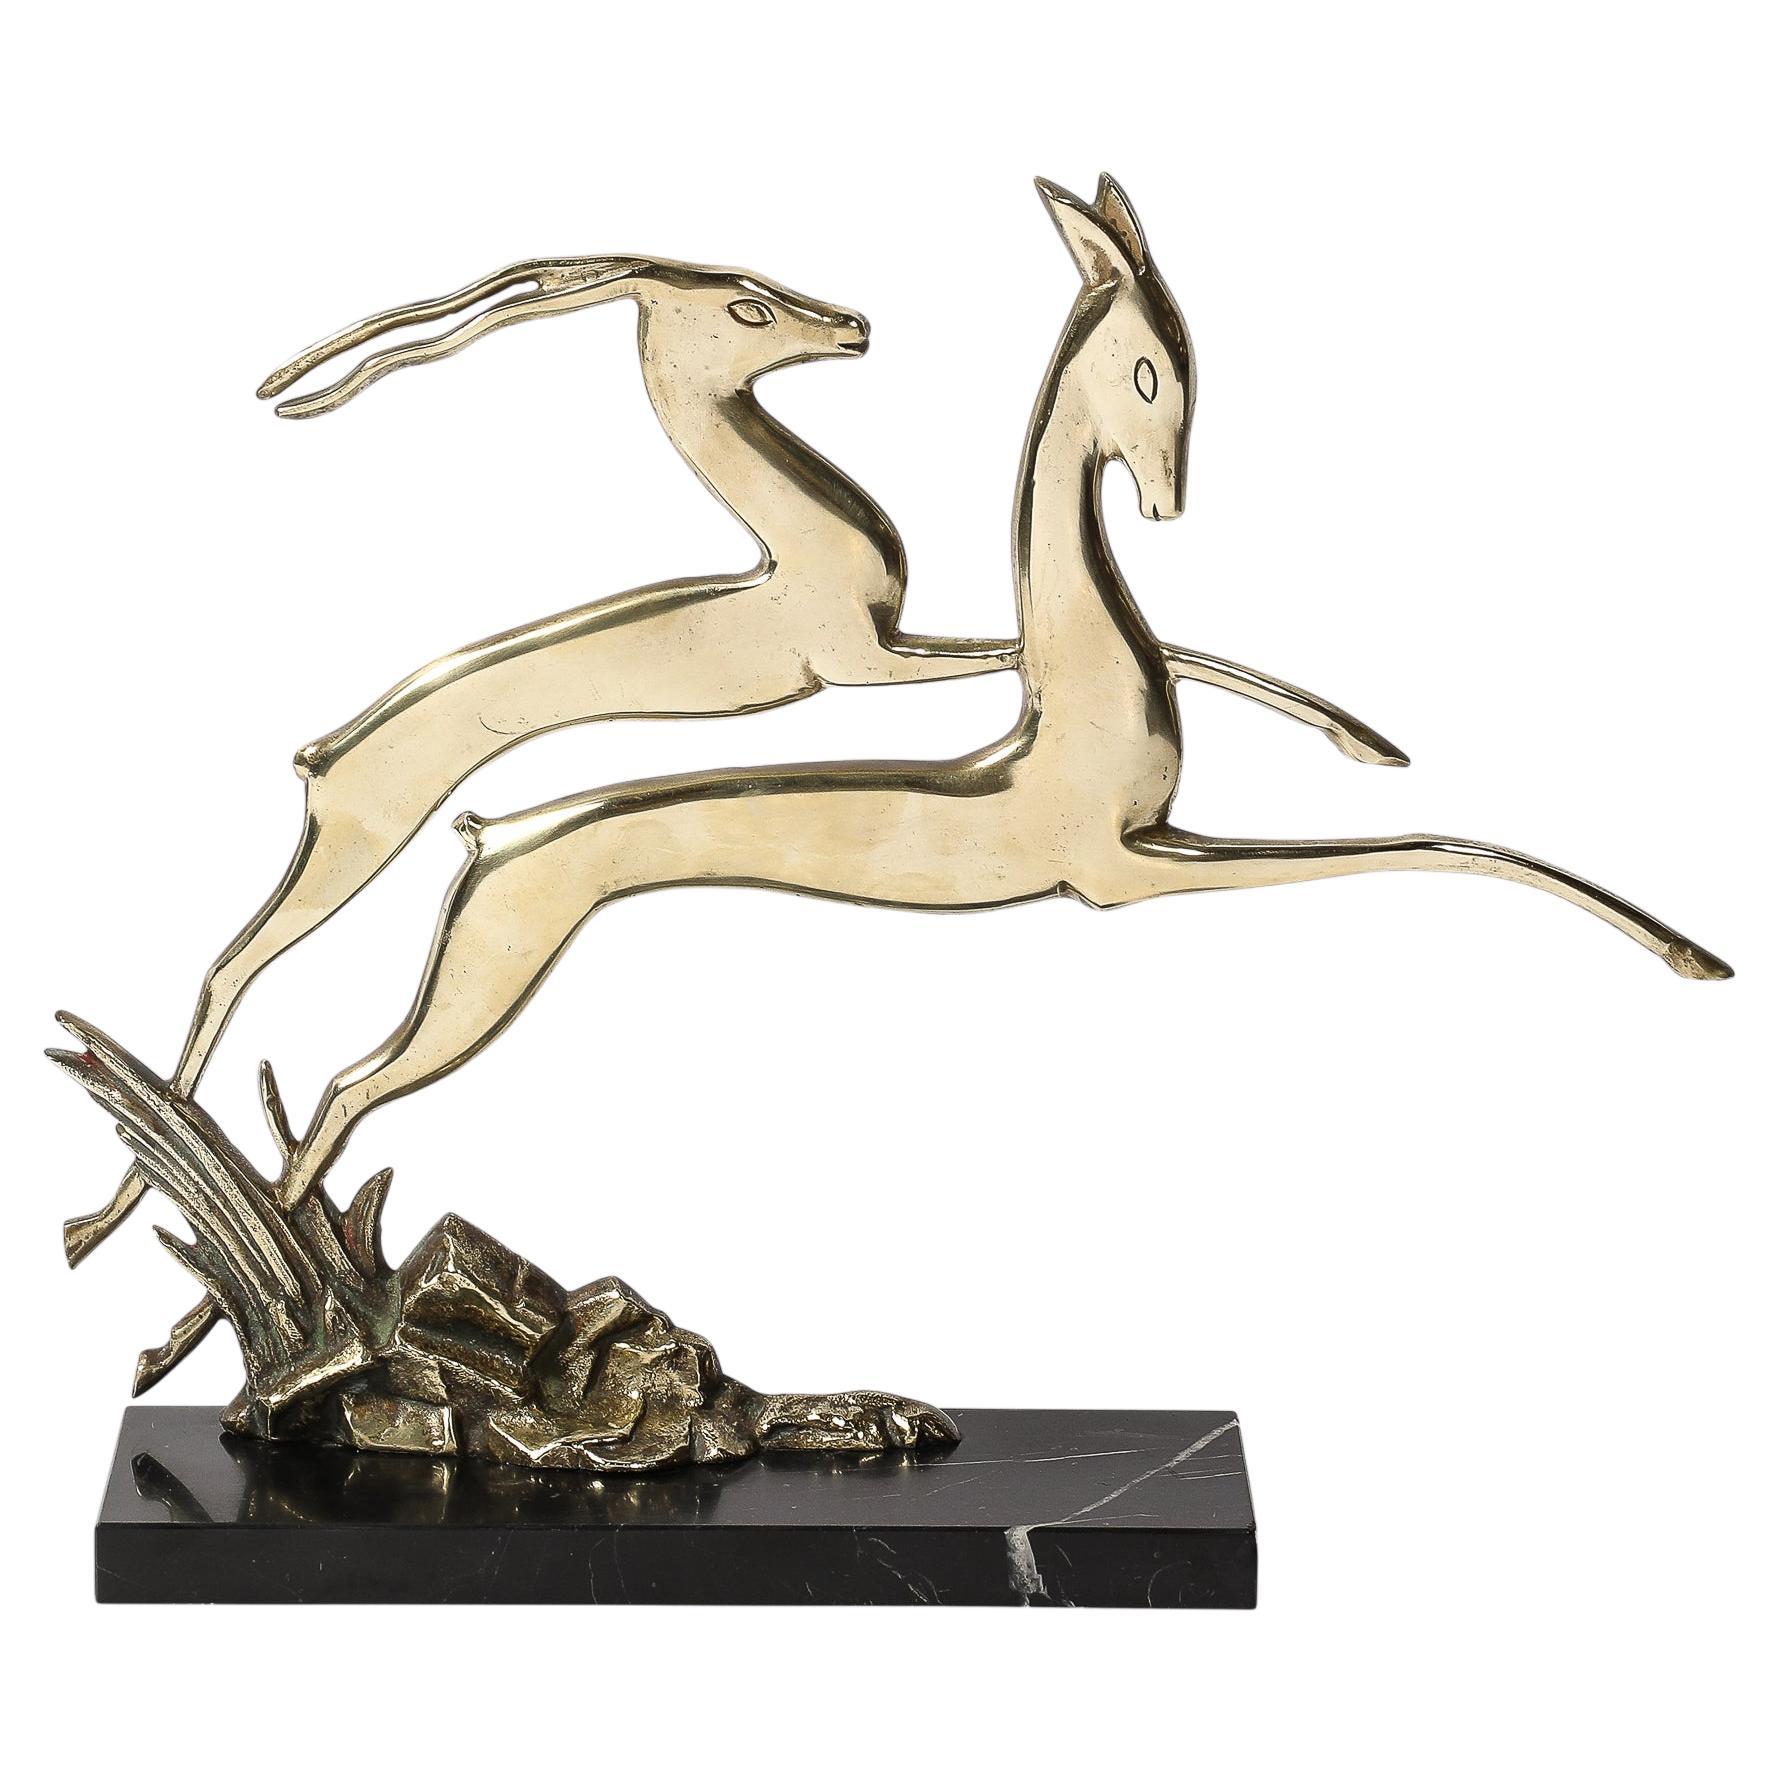 Art Deco Leaping Gazelle Sculpture in Polished Brass on Black Marble Base For Sale